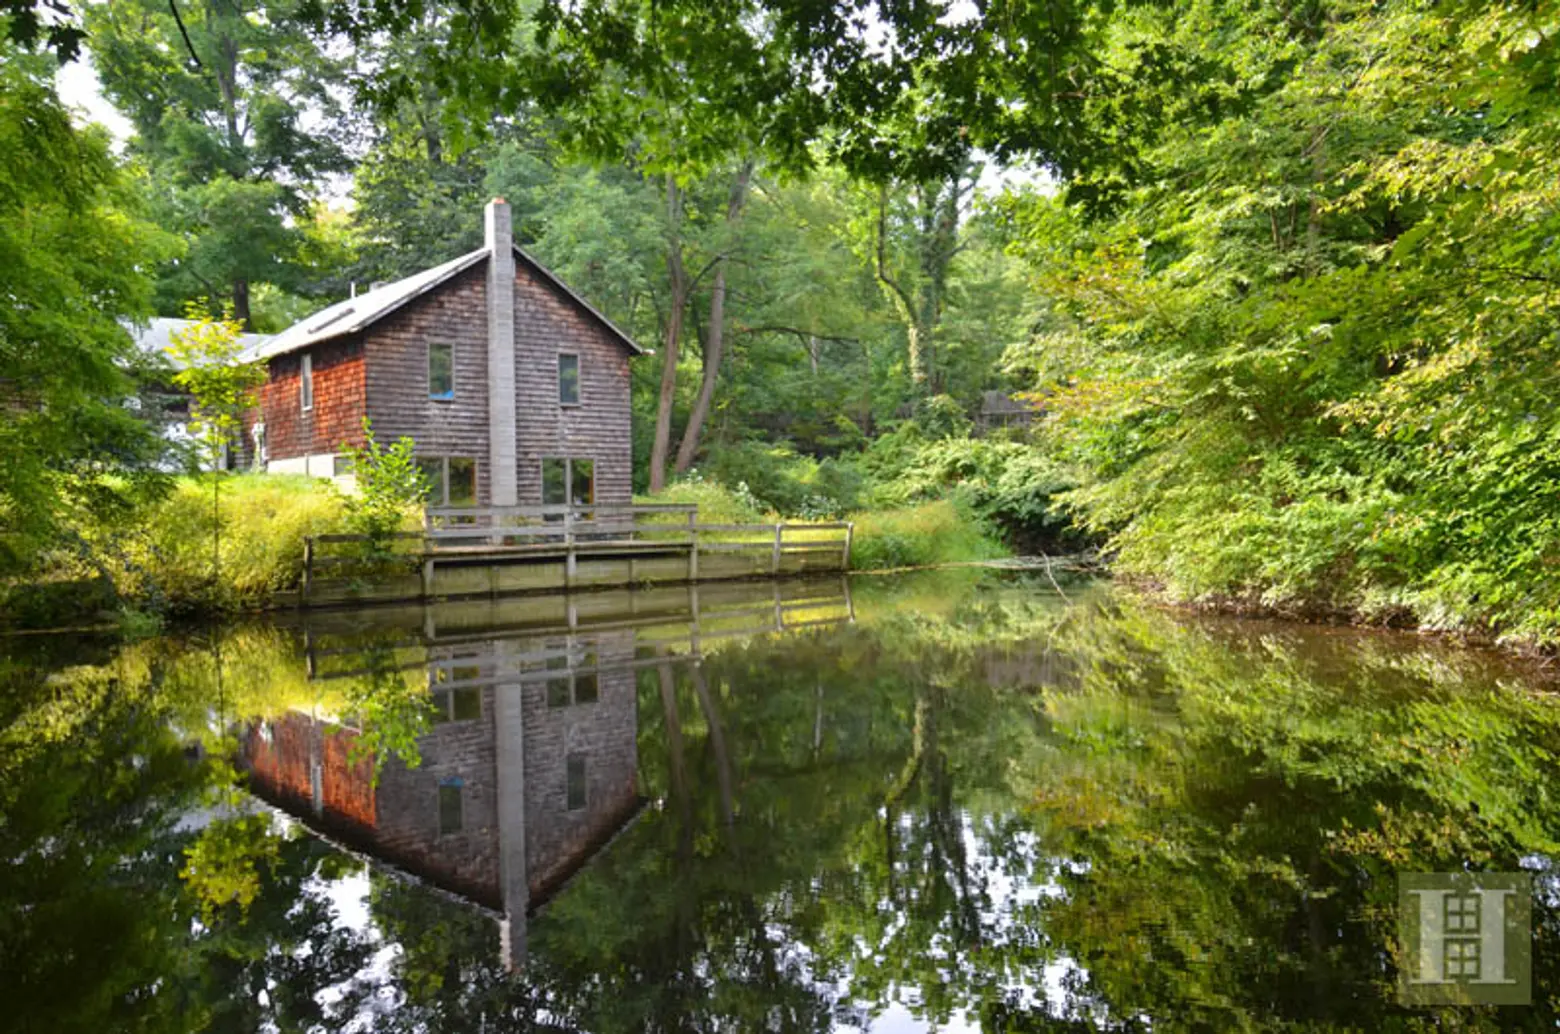 Darling Upstate Cottage Looks Like It Came Straight out of a Storybook